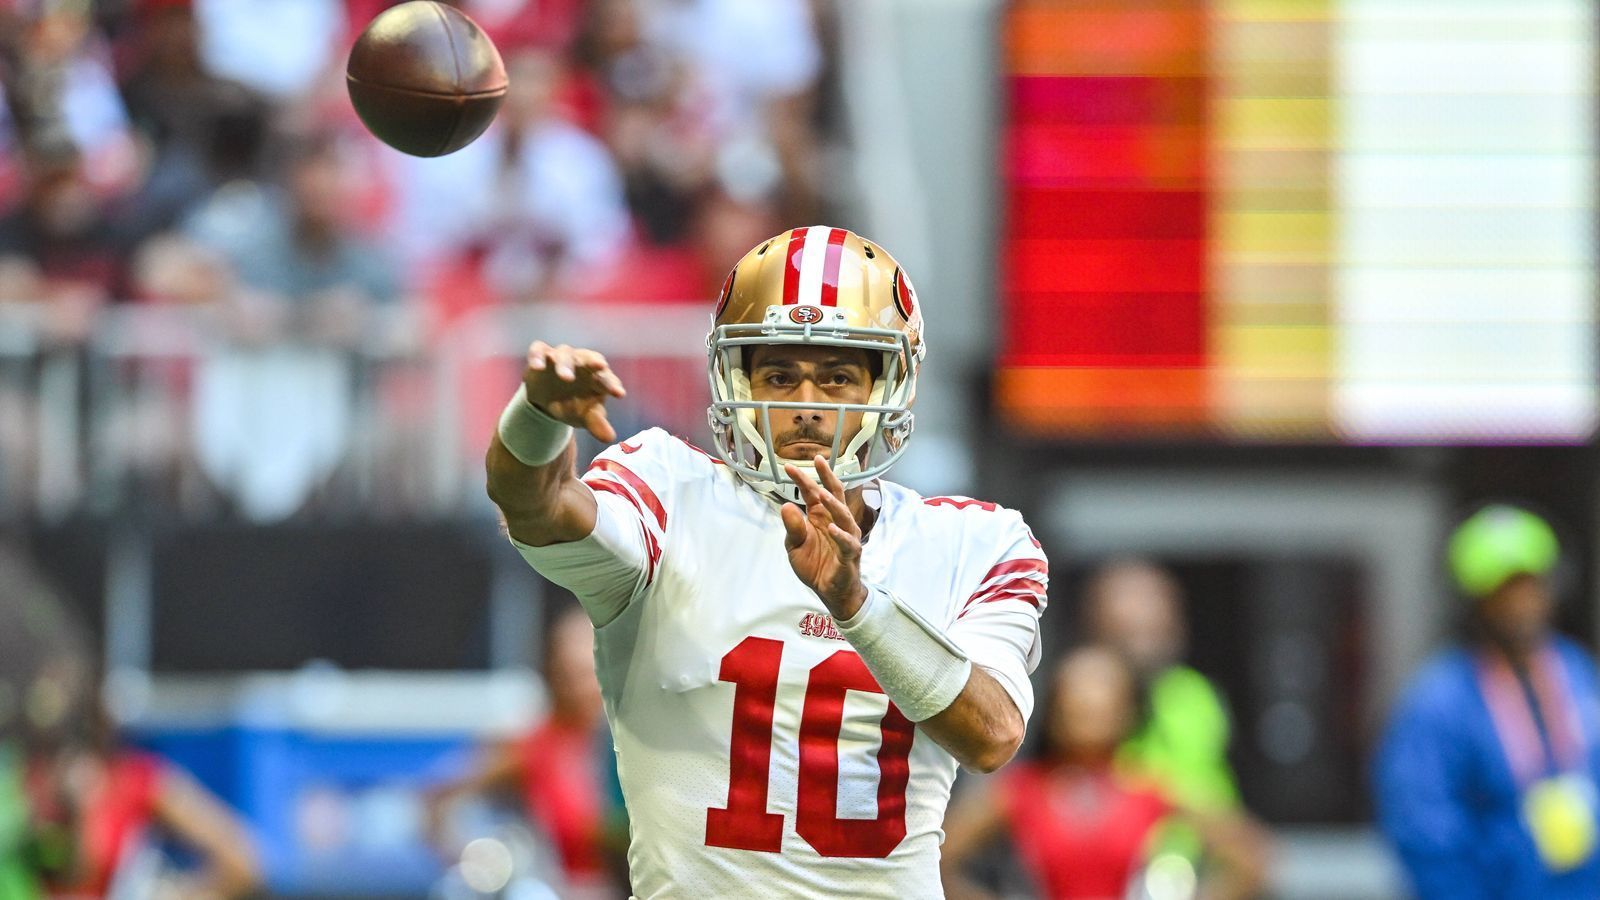 
                <strong>Completion Percentage</strong><br>
                &#x2022; Brock Purdy: 67,1 Prozent<br>&#x2022; Joe Montana: 63,2 Prozent<br>&#x2022; Steve Young: 64,3 Prozent<br>&#x2022; Jimmy Garoppolo: 67,6 Prozent<br>
              